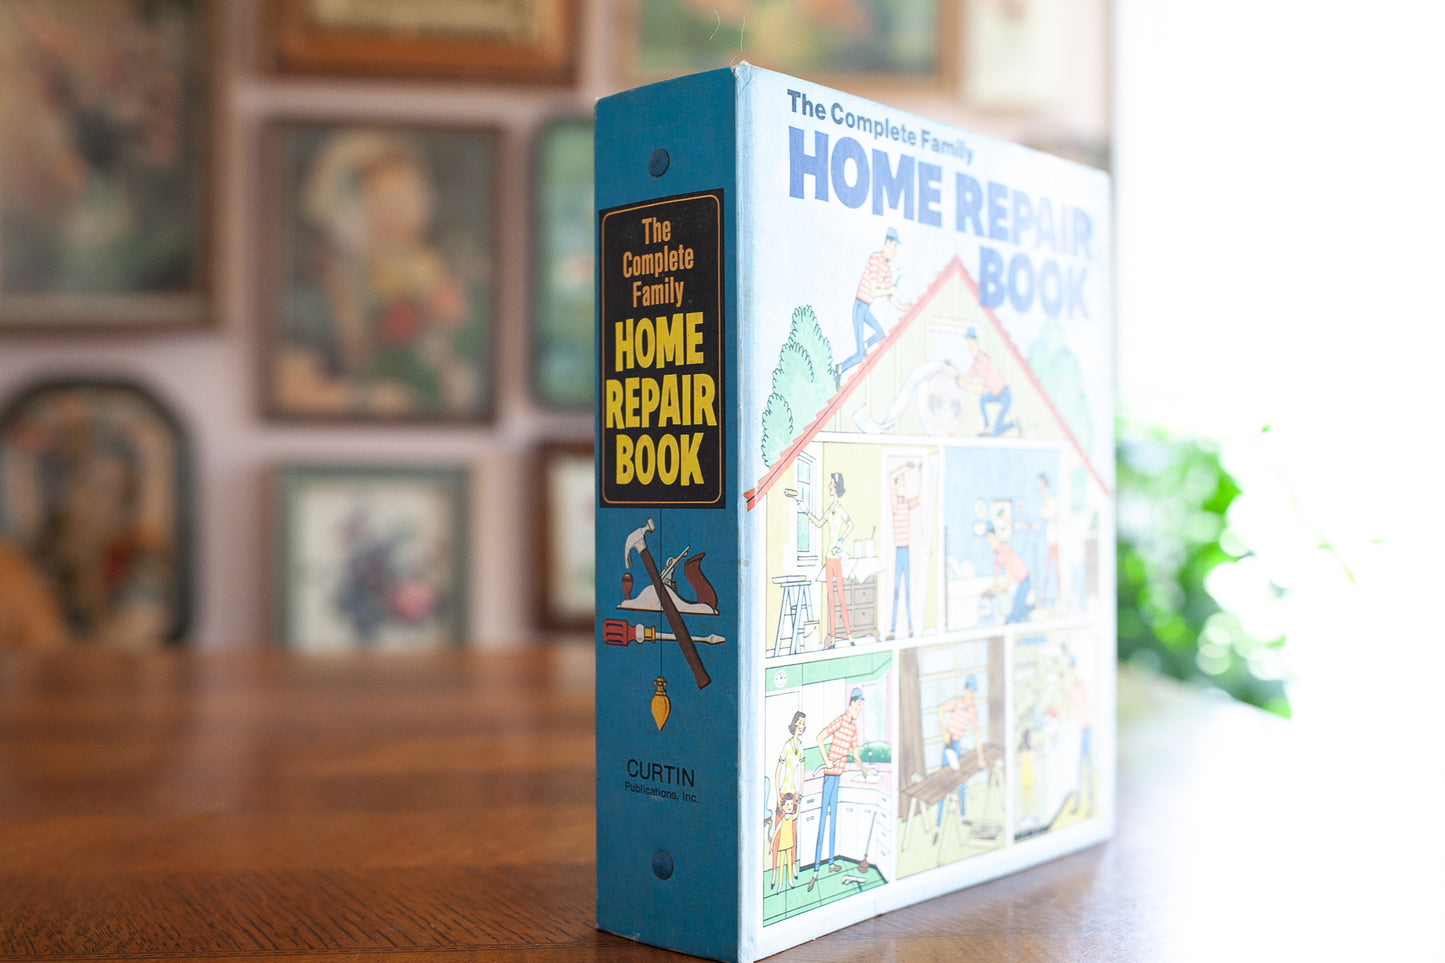 The Complete Family Home Repair Book